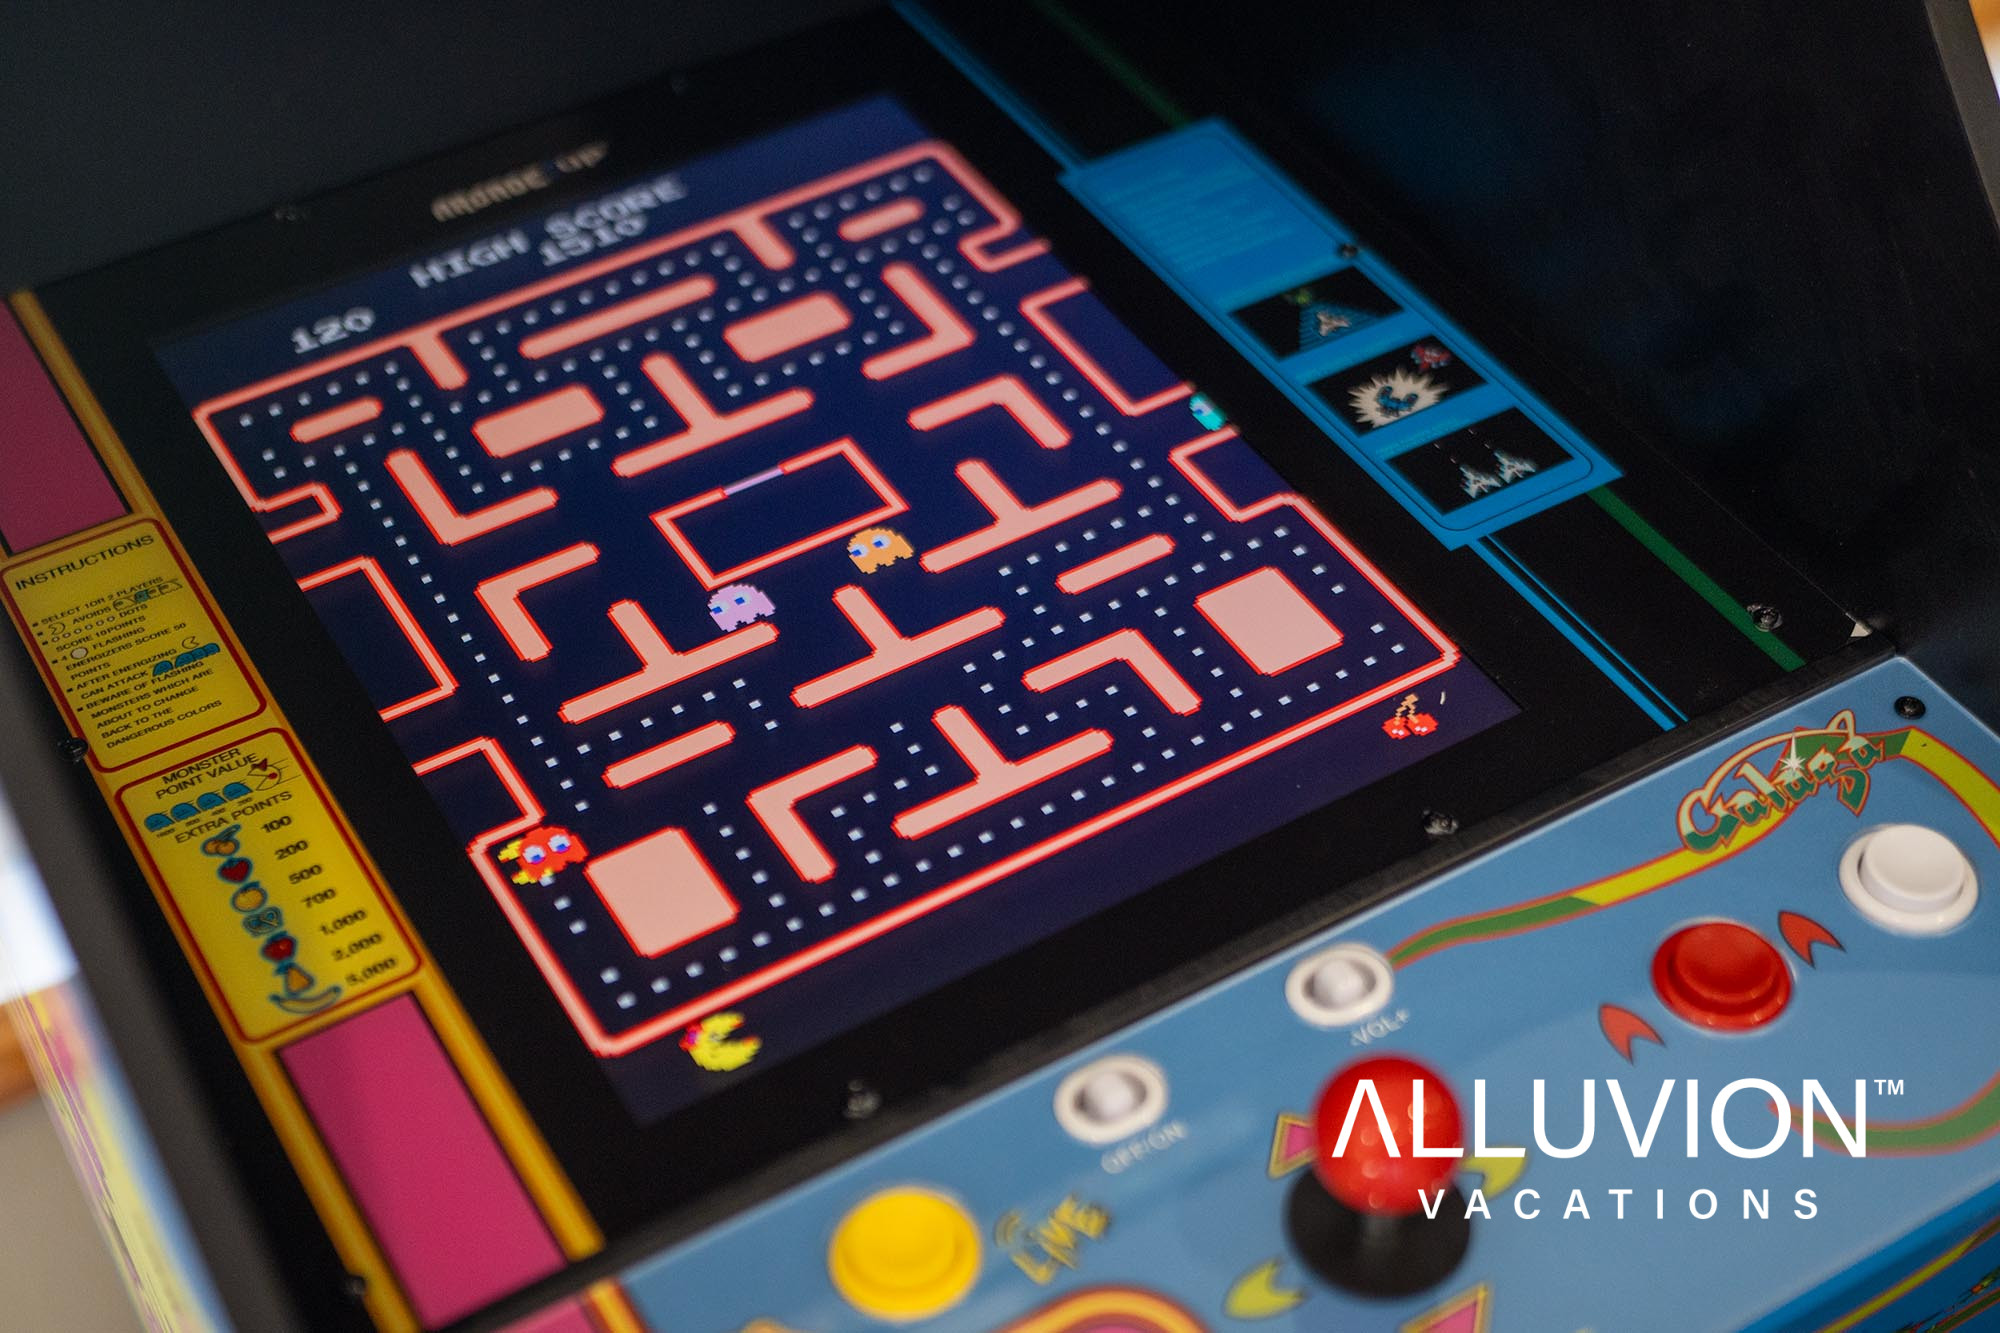 Retro Gaming Nostalgia: Step Back in Time – Things to do at Alluvion Vacations properties in the Hudson Valley and Catskills